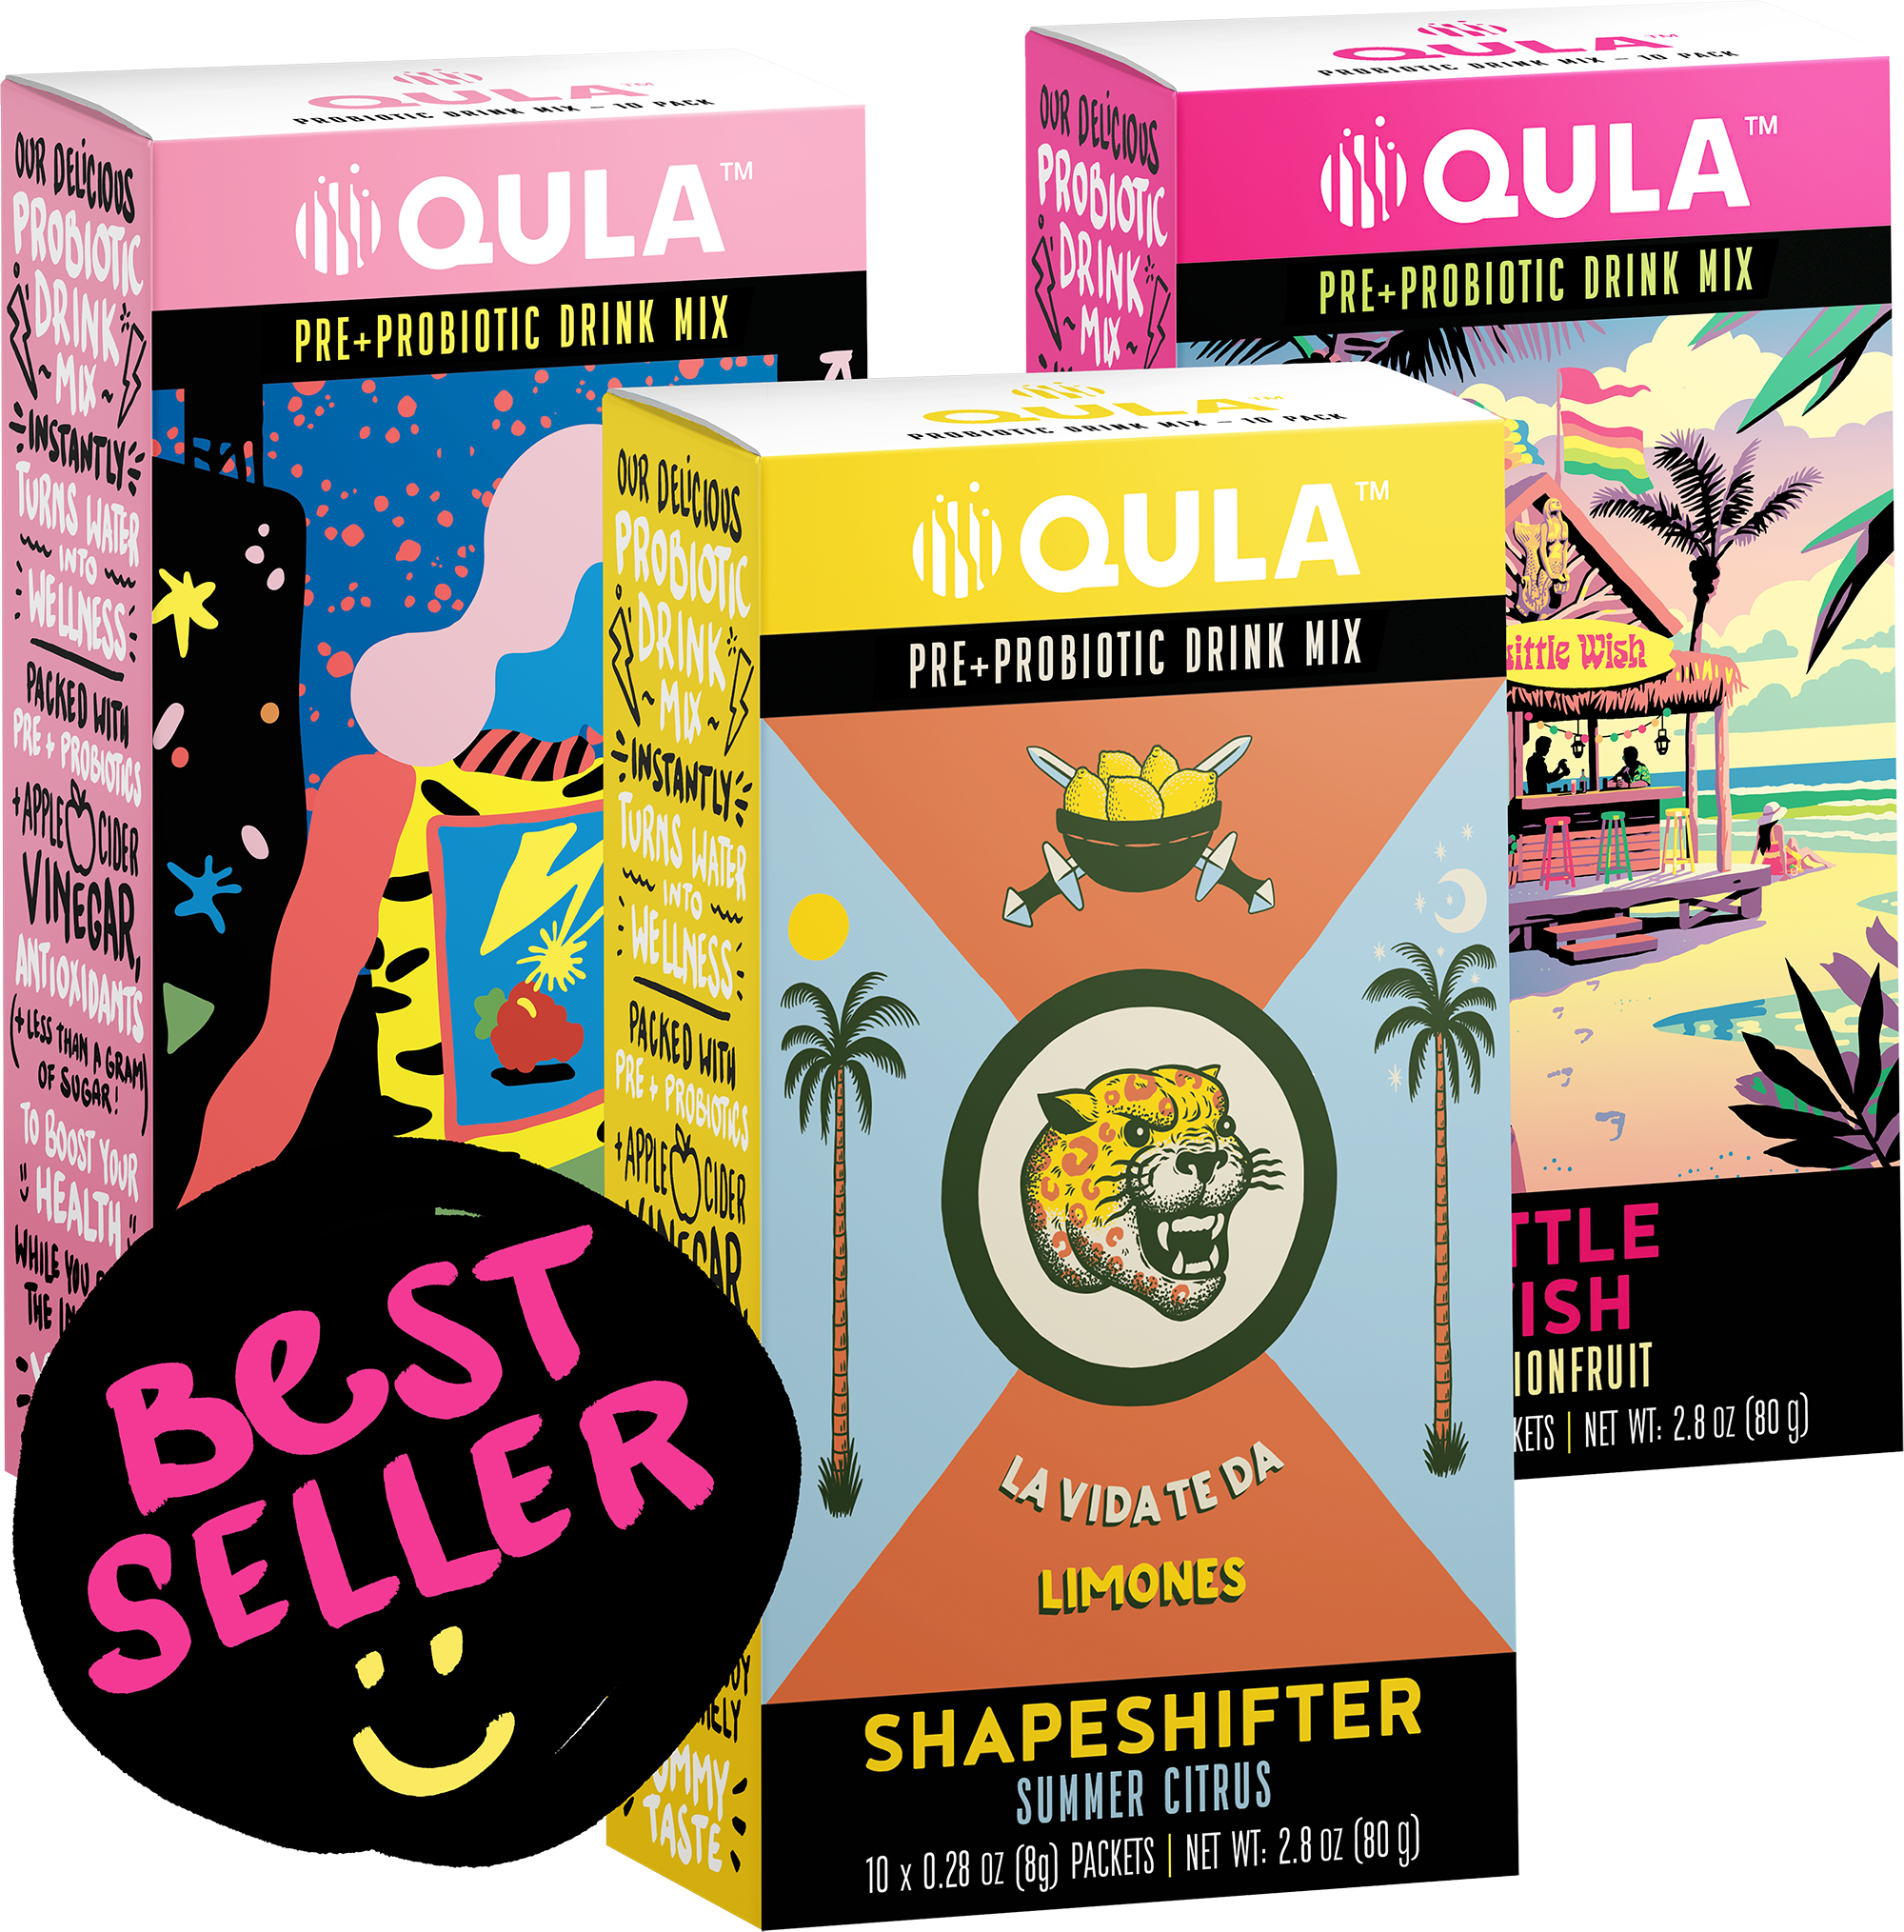 QULA ~ WELCOME to the new generation of powdered drink mixes!